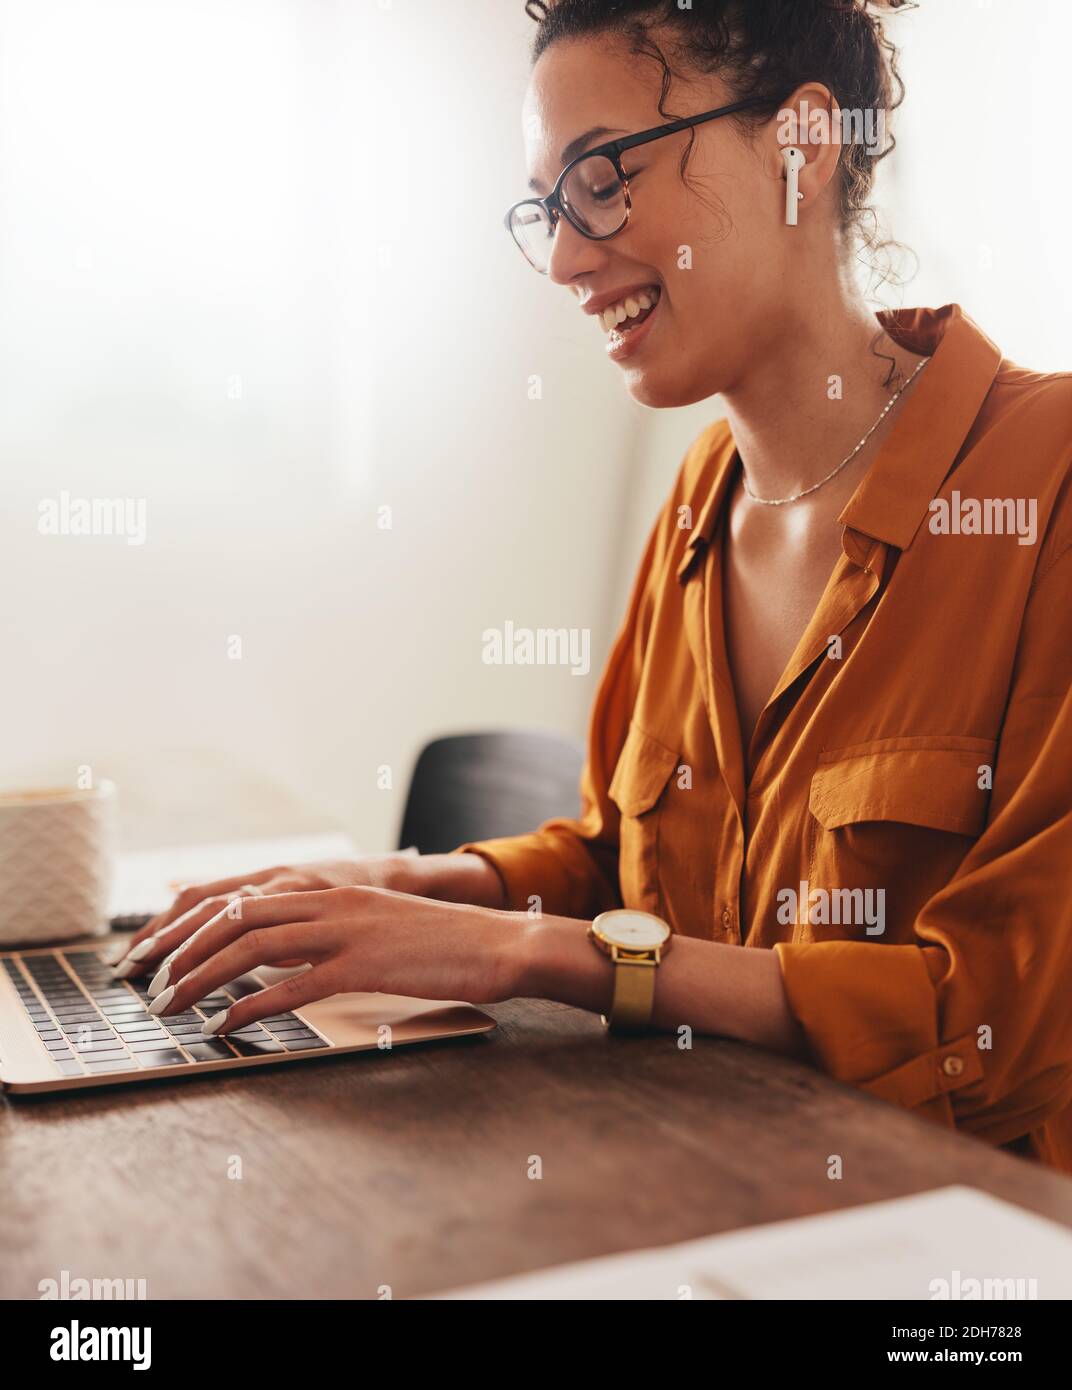 Woman smiling while working on laptop. Businesswoman wearing wireless earphones using a laptop at home. Stock Photo